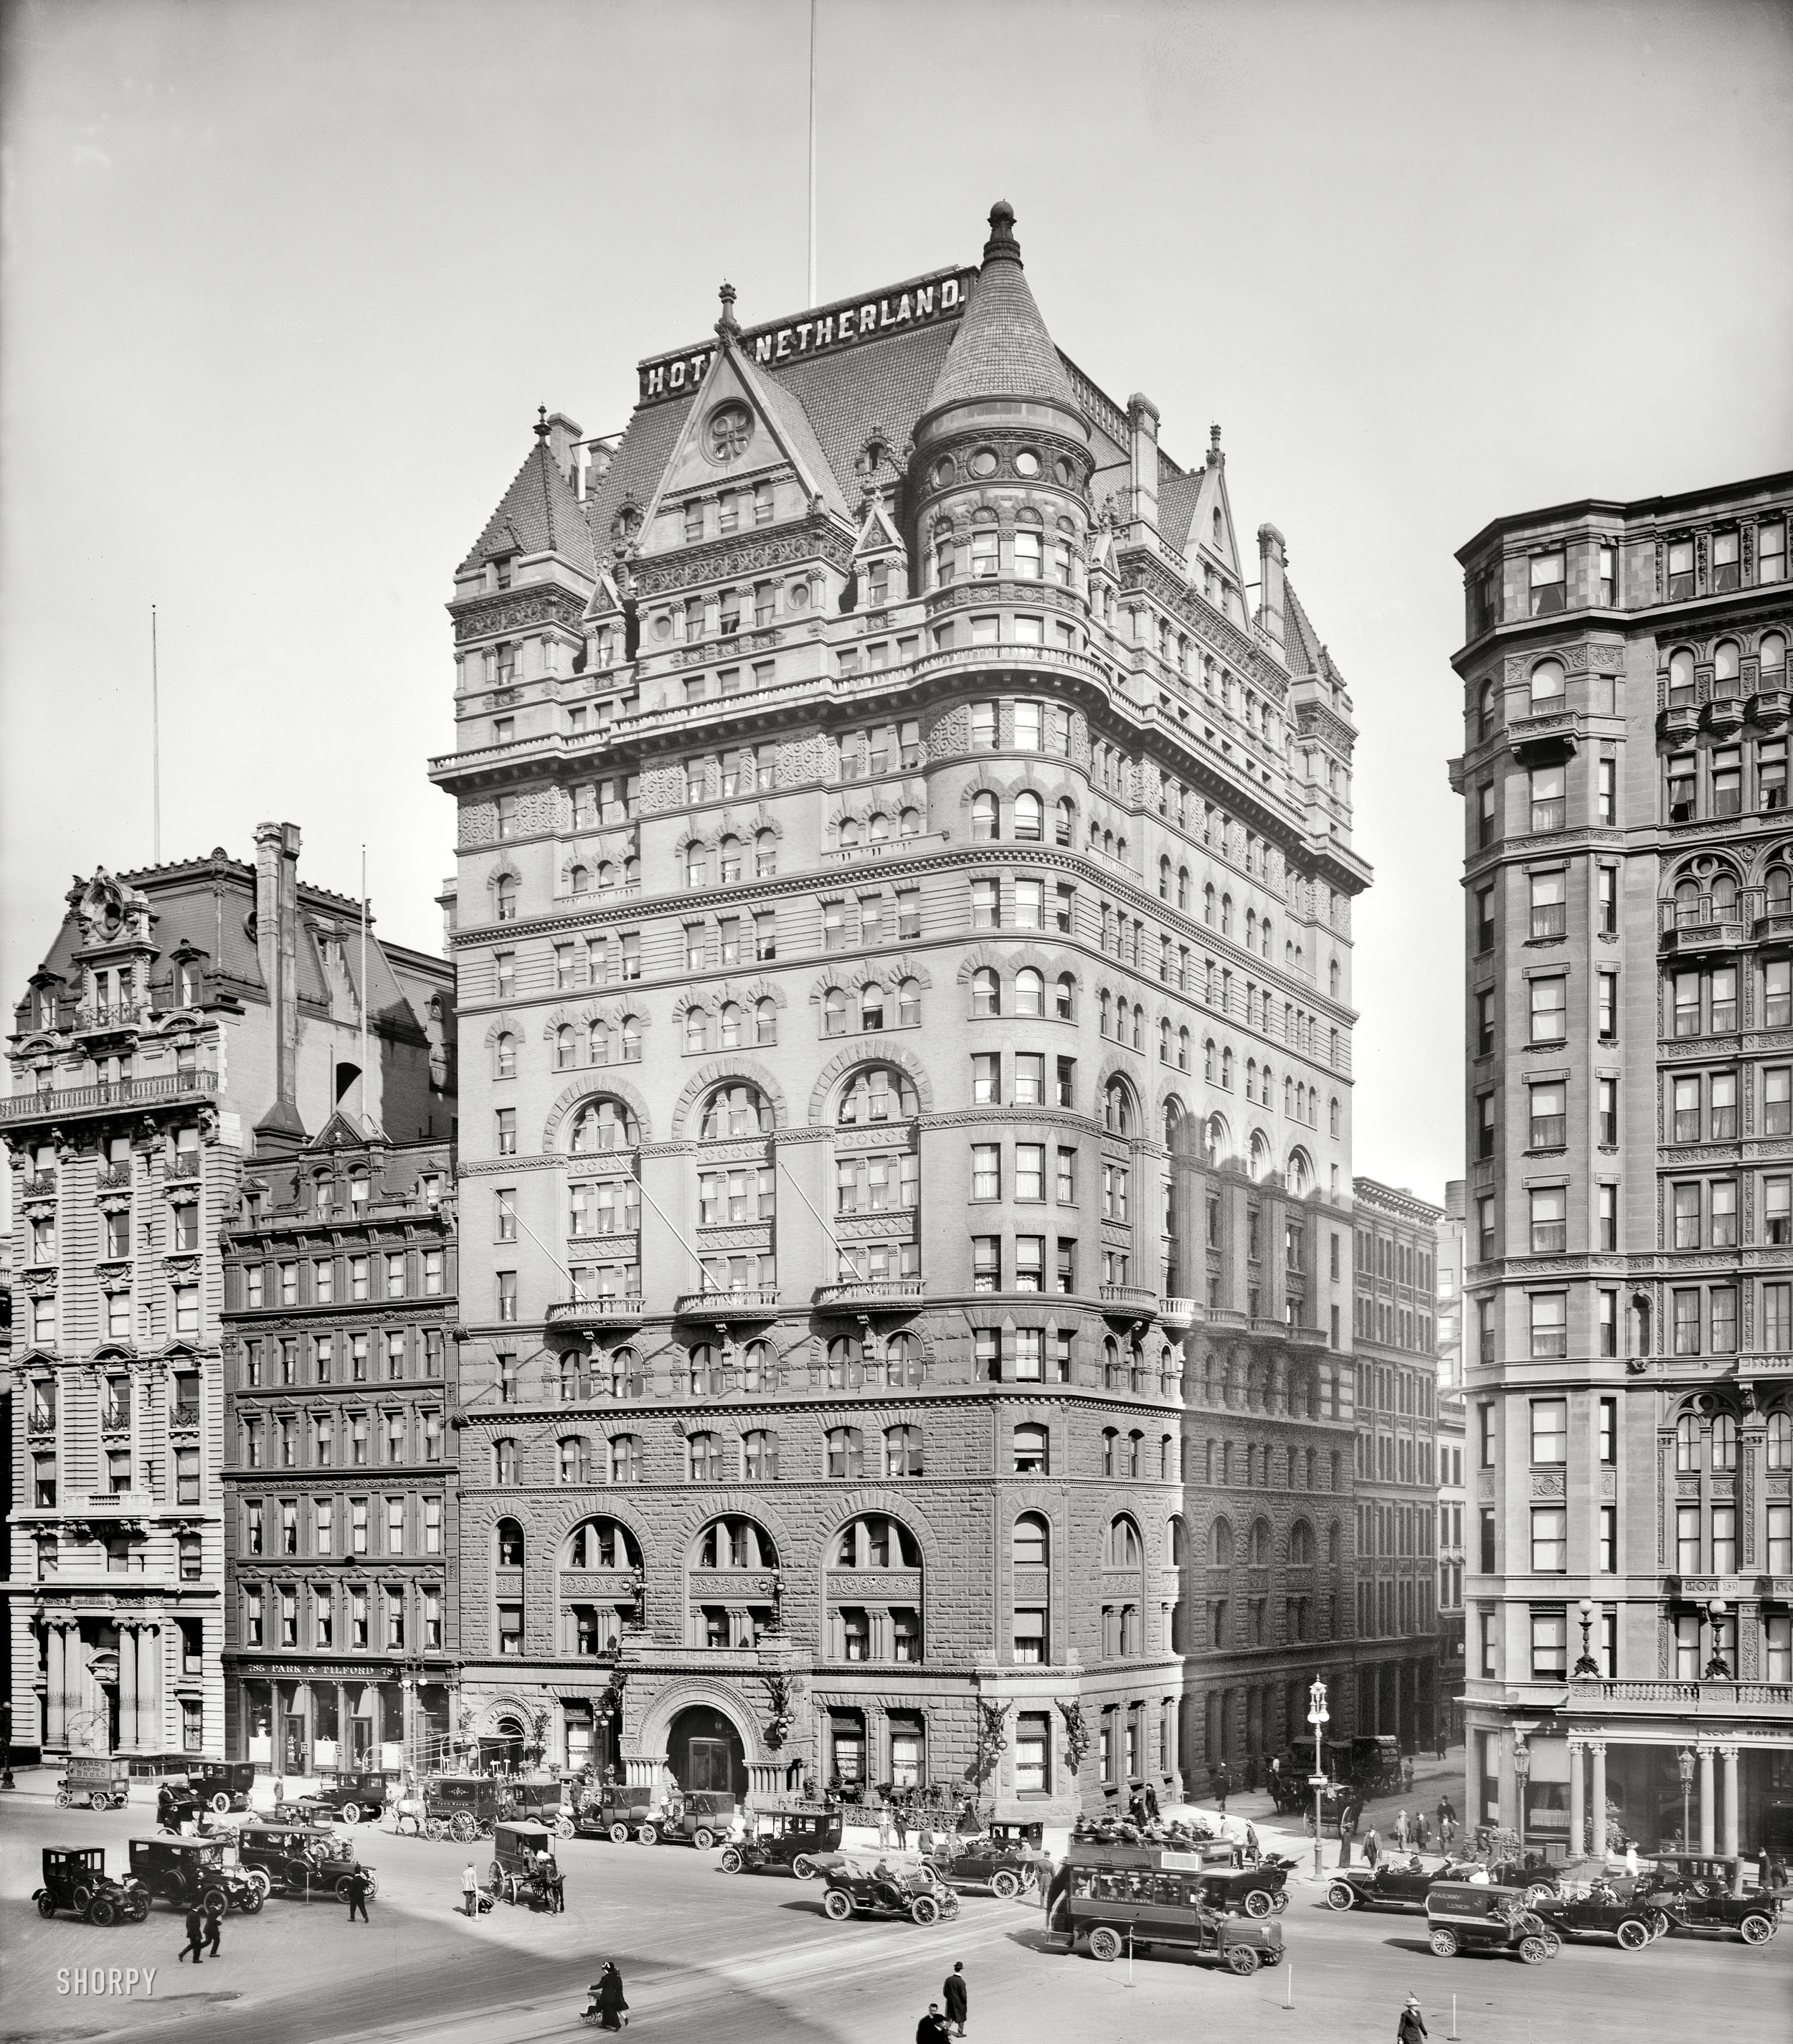 New York circa 1913. "Hotel Netherland, Fifth Avenue." 8x10 inch dry plate glass negative, Detroit Publishing Company. View full size.